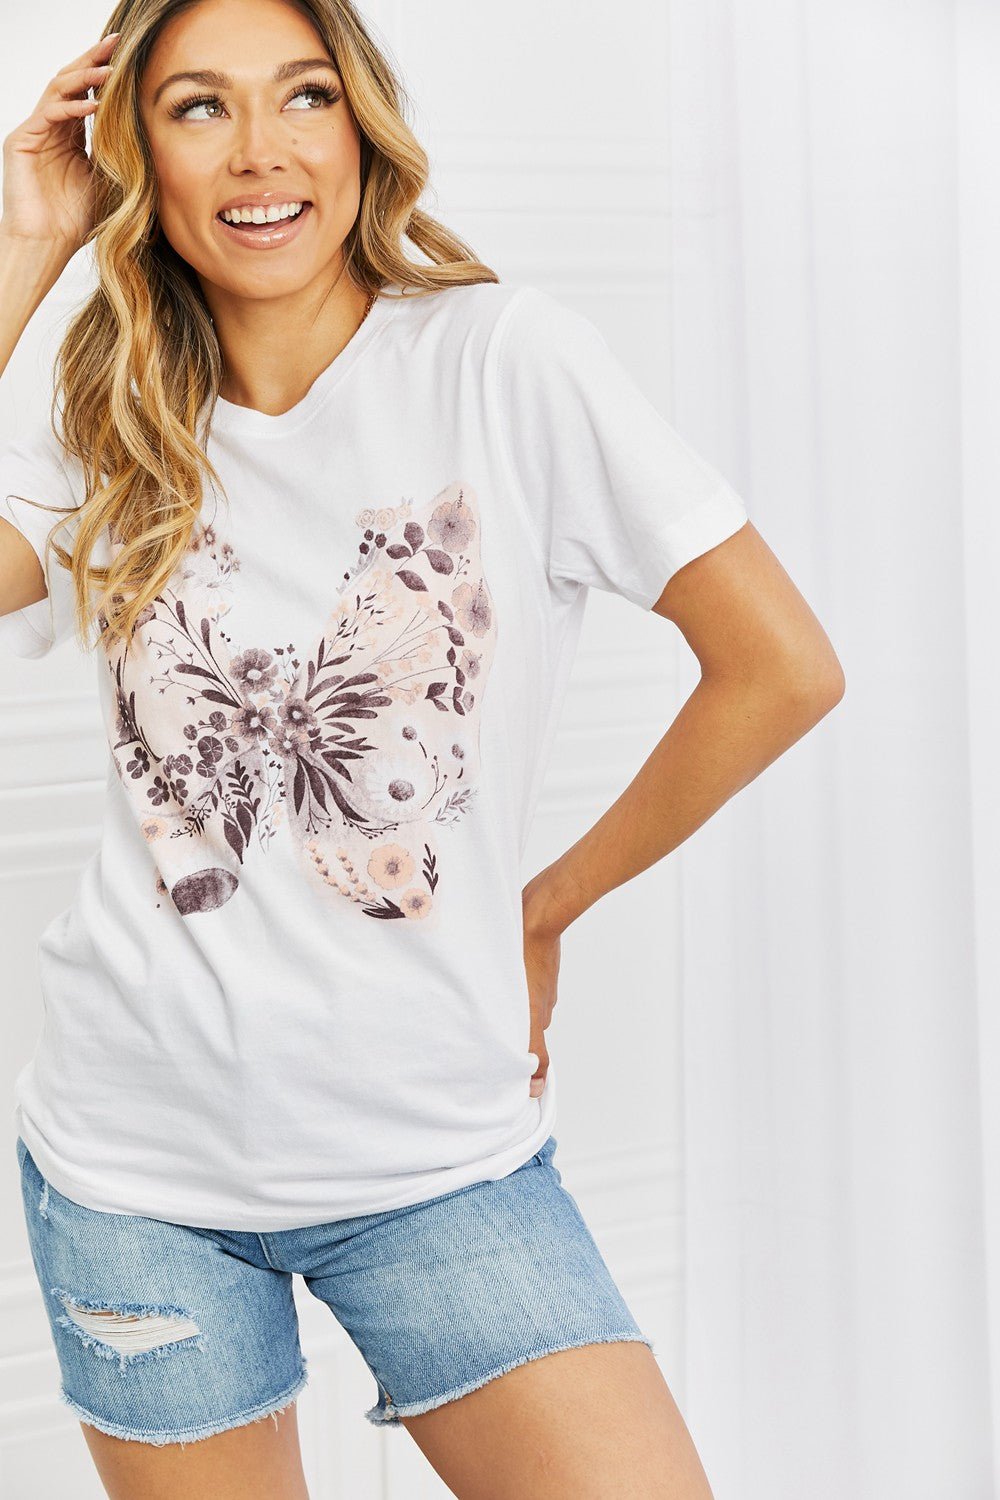 mineB You Give Me Butterflies Graphic T-Shirt - GemThreads Boutique